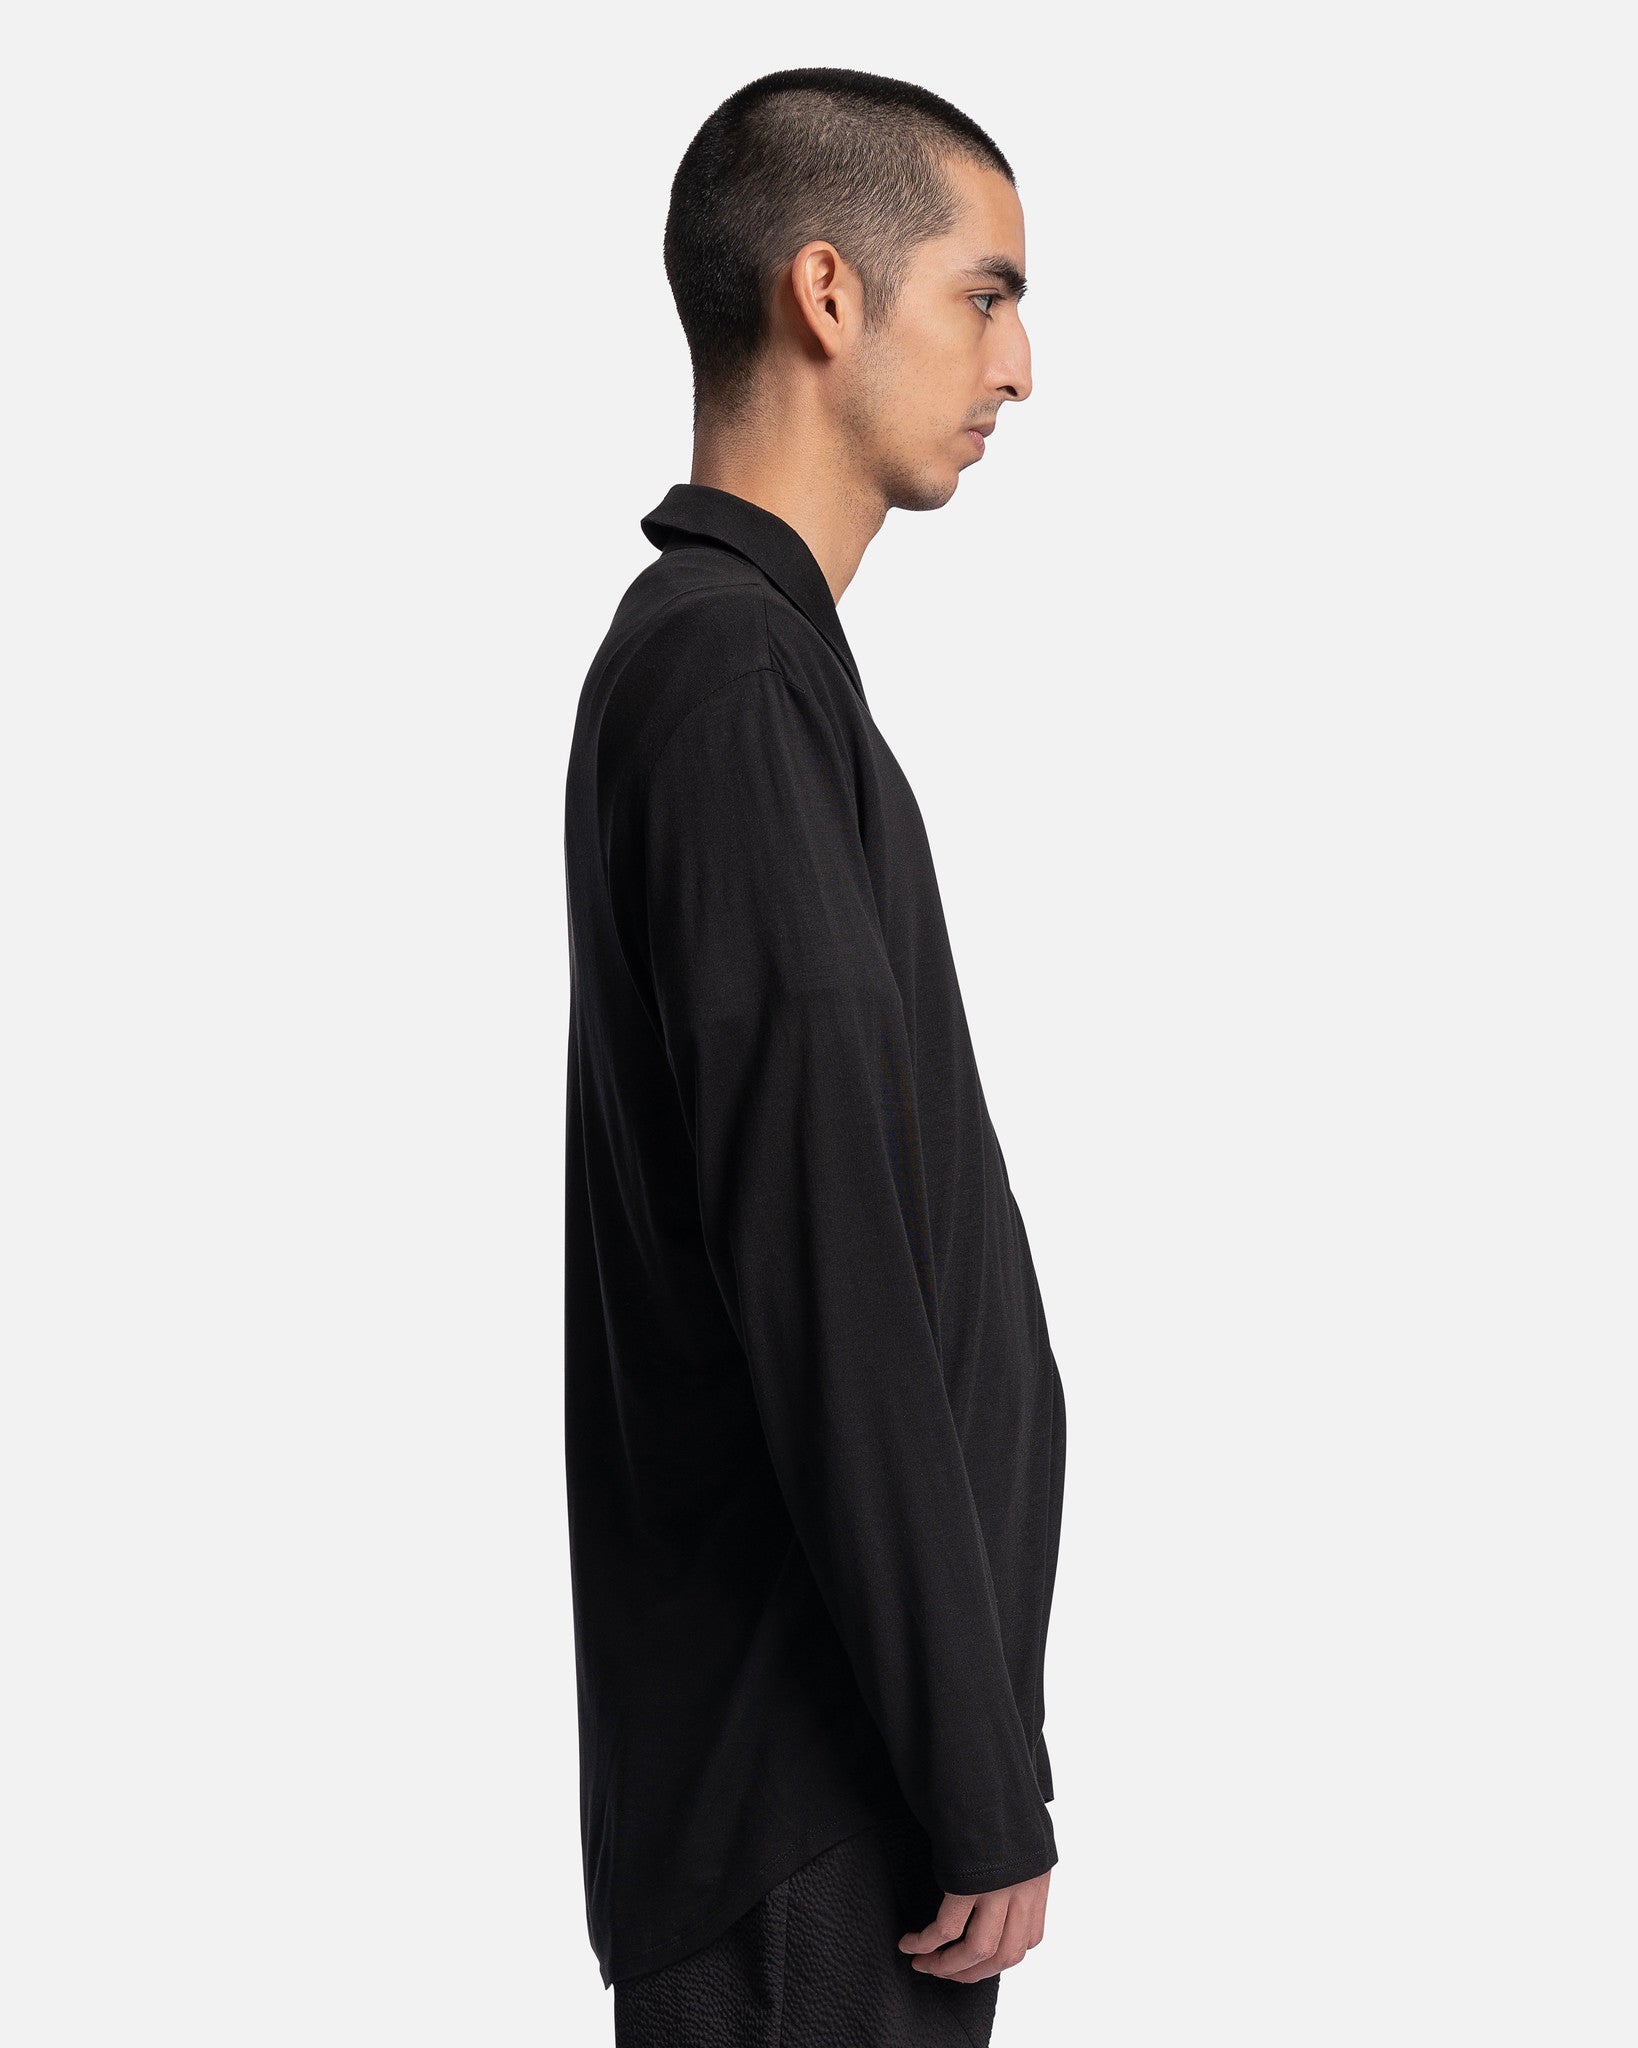 POST ARCHIVE FACTION (P.A.F) Men's Shirts 5.0+ Shirt Right in Black